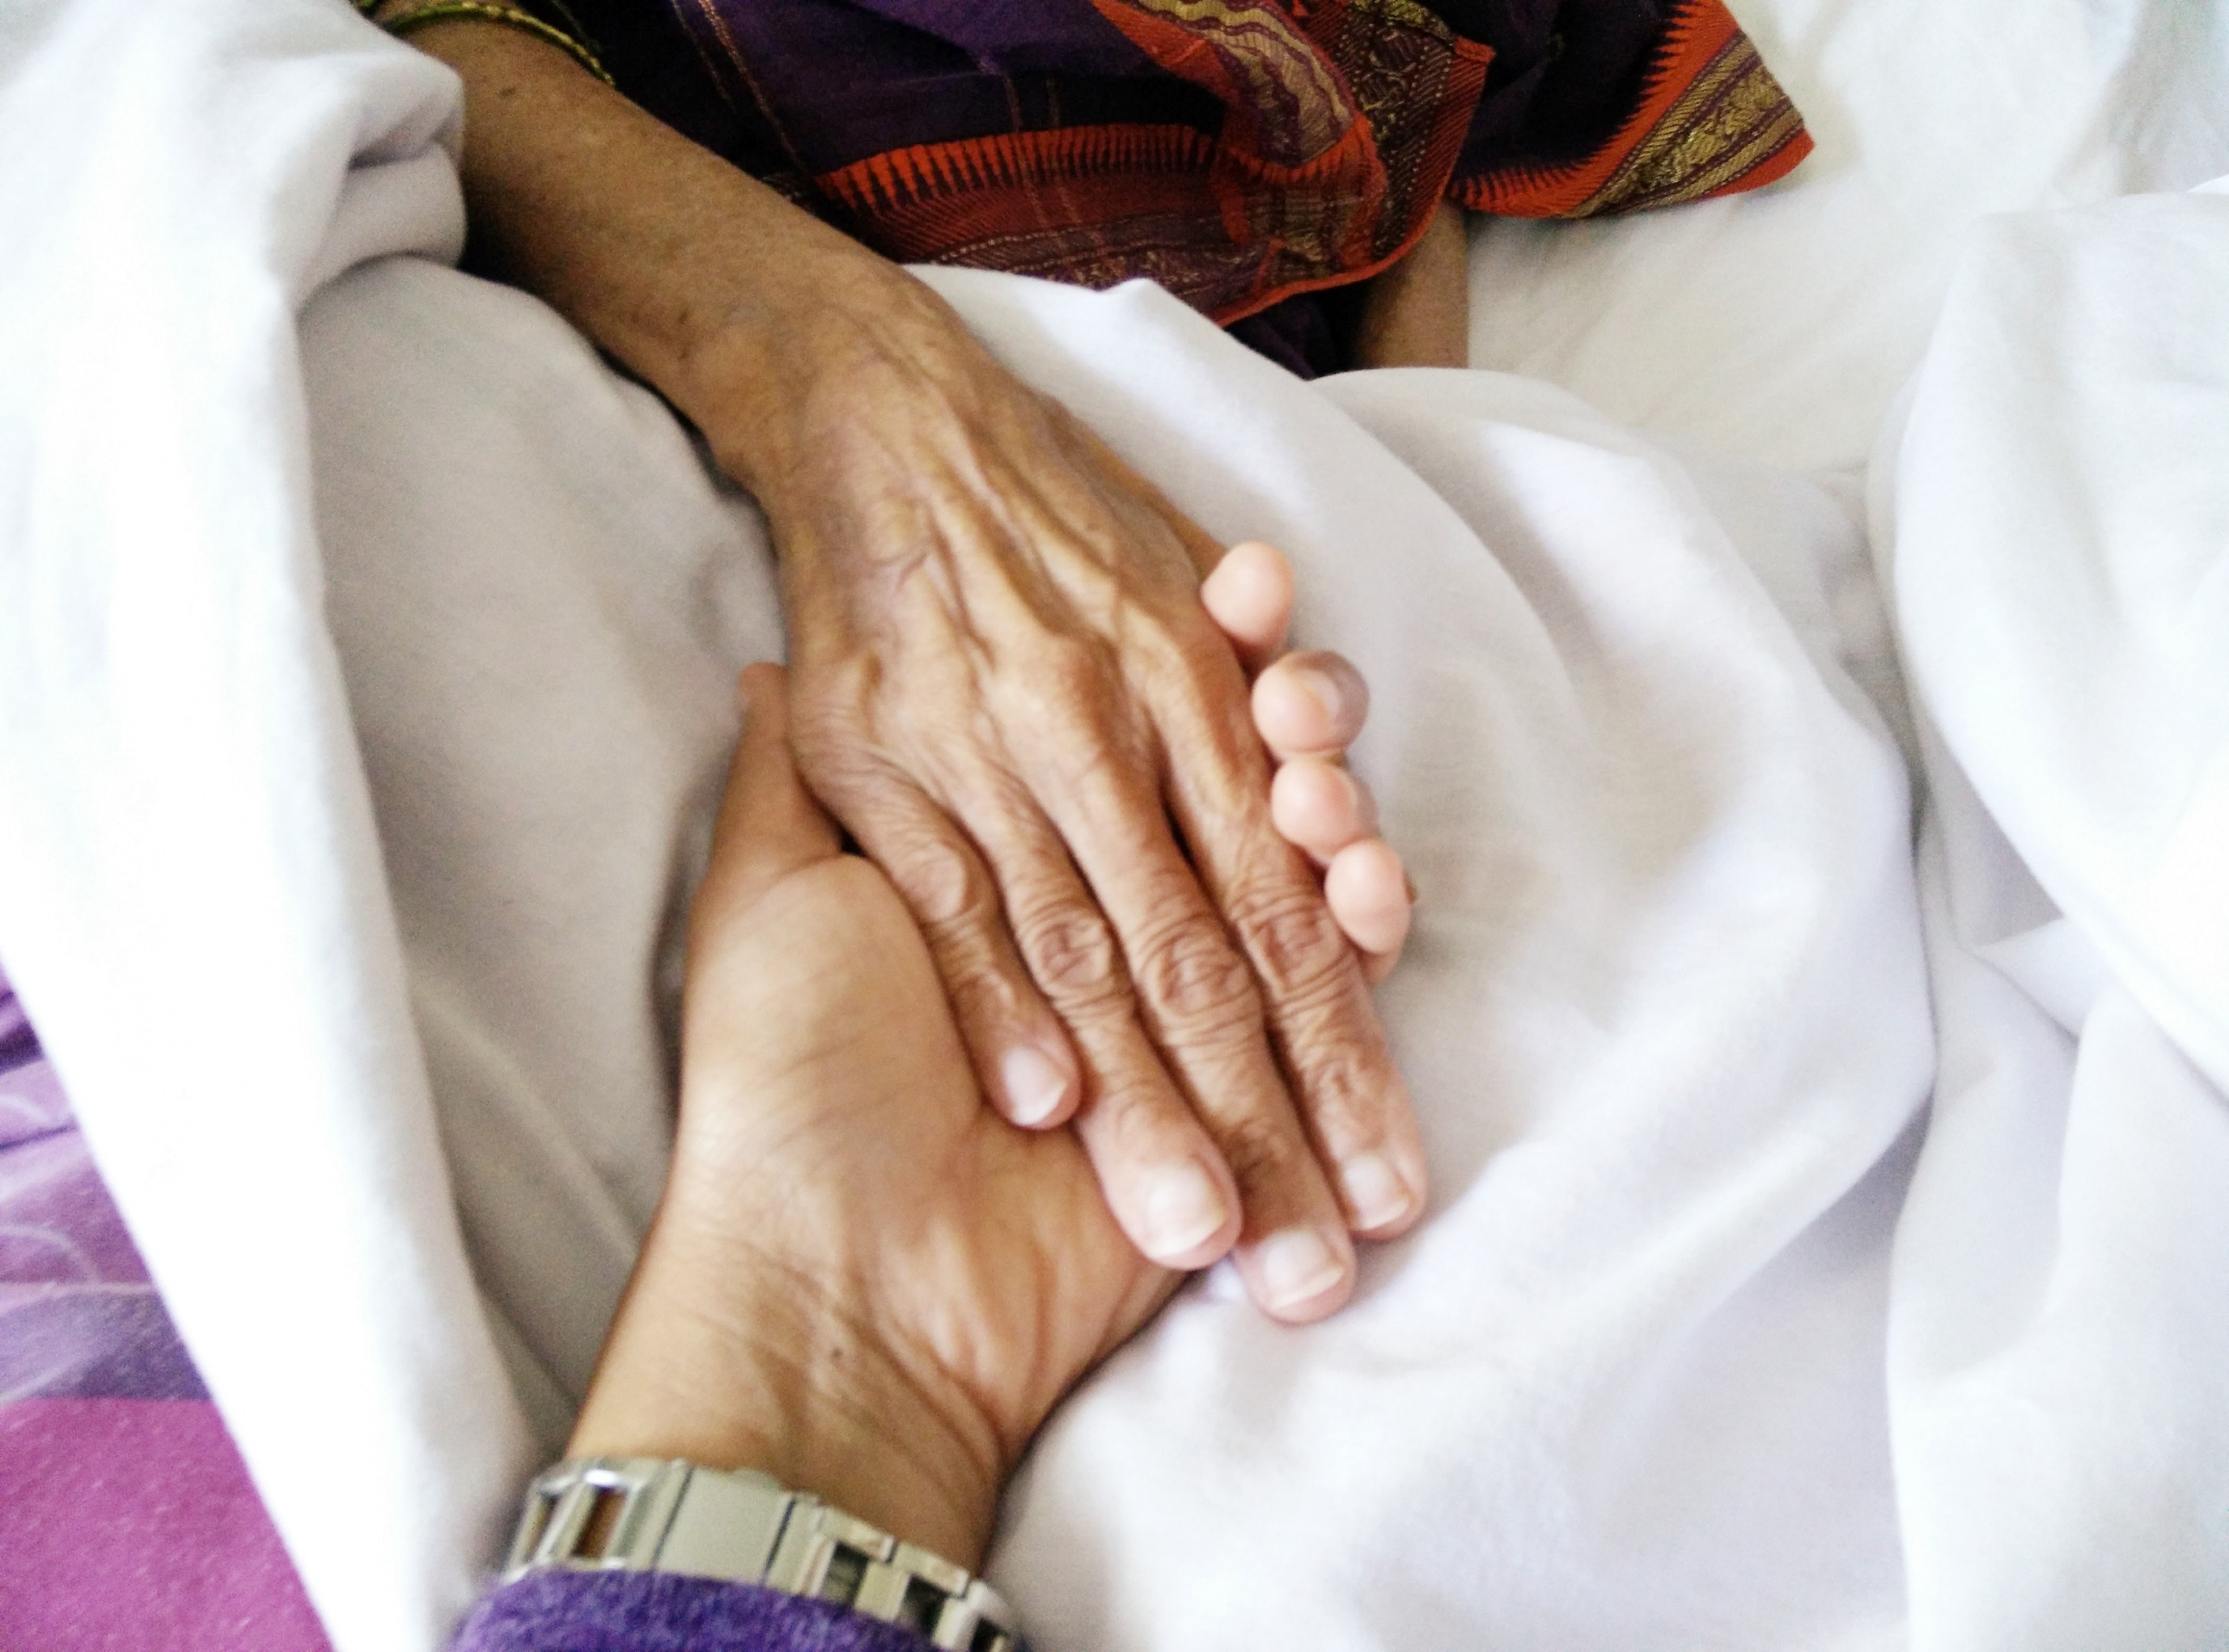 Ranjini Rao holds her mother’s hand, who died from cancer in 2016. Photo: Ranjini Rao